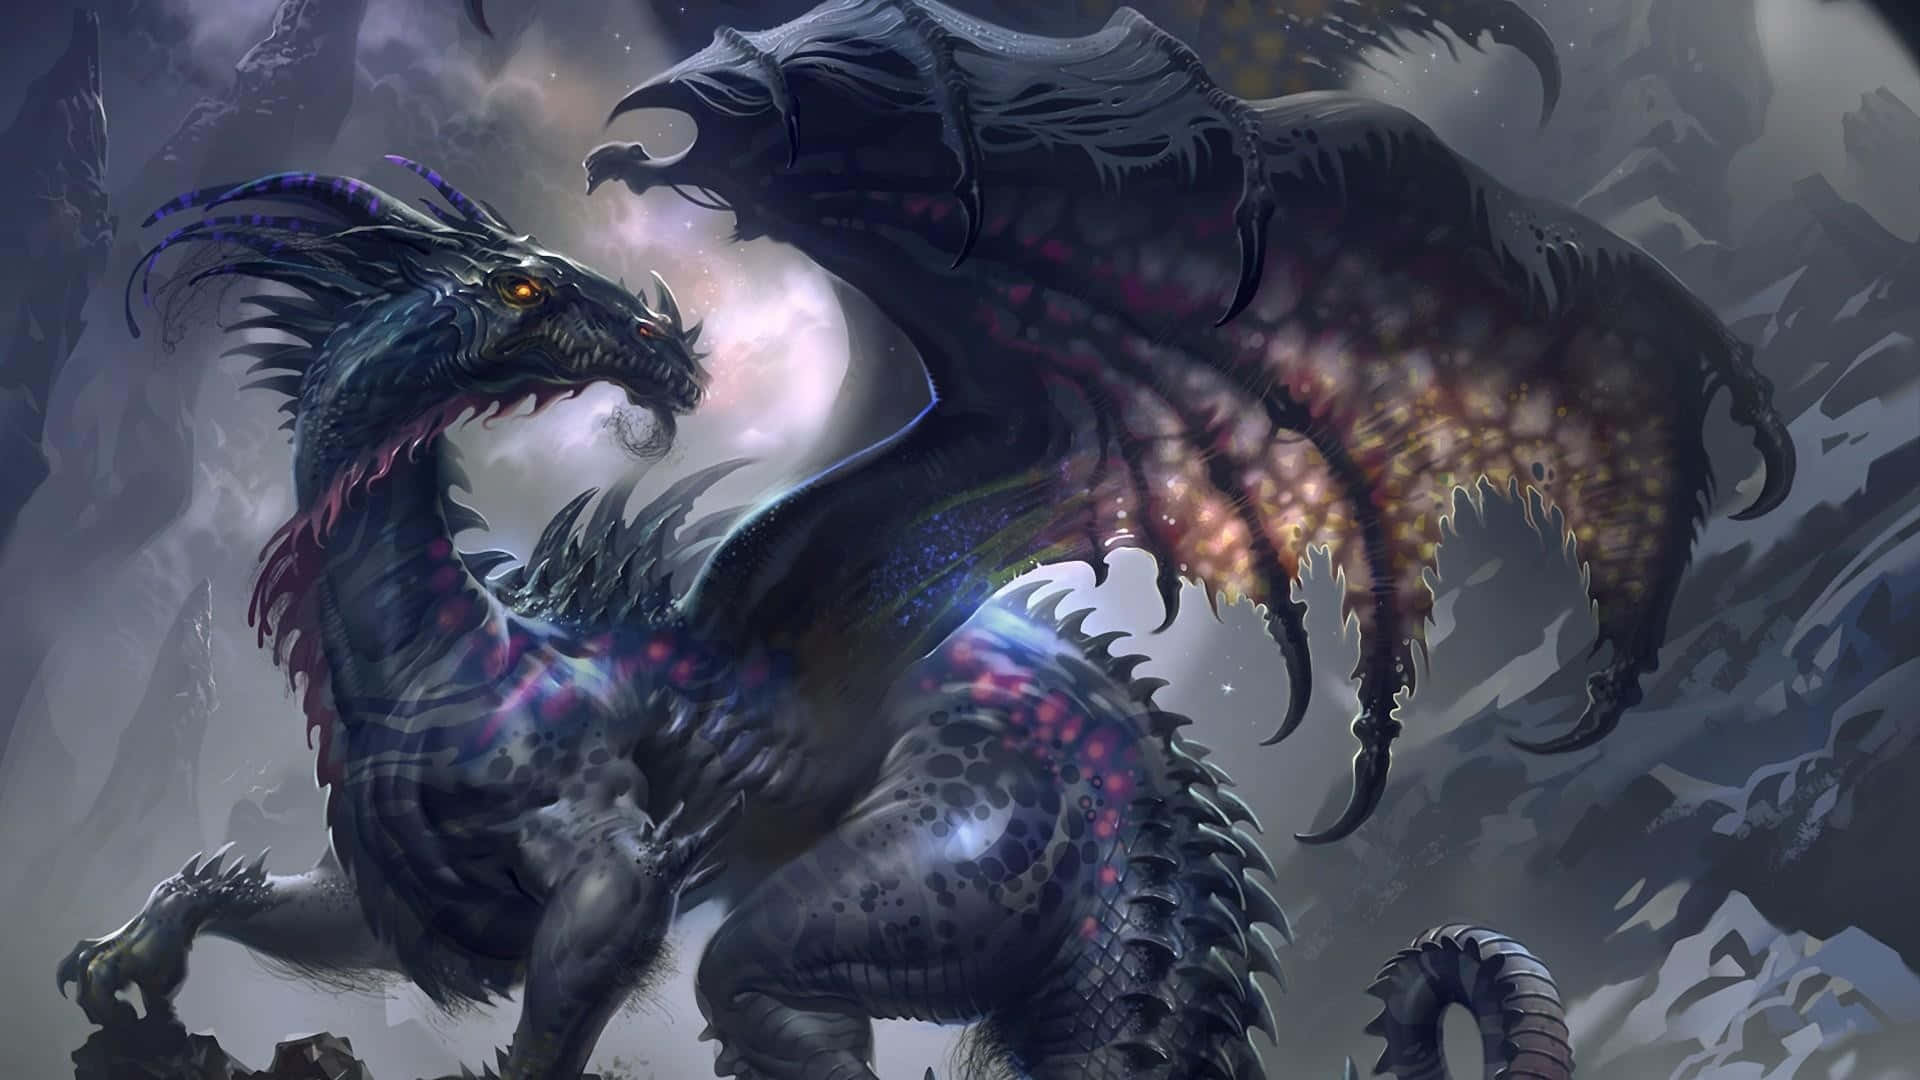 Download The majestic charm of a dragon in profile | Wallpapers.com